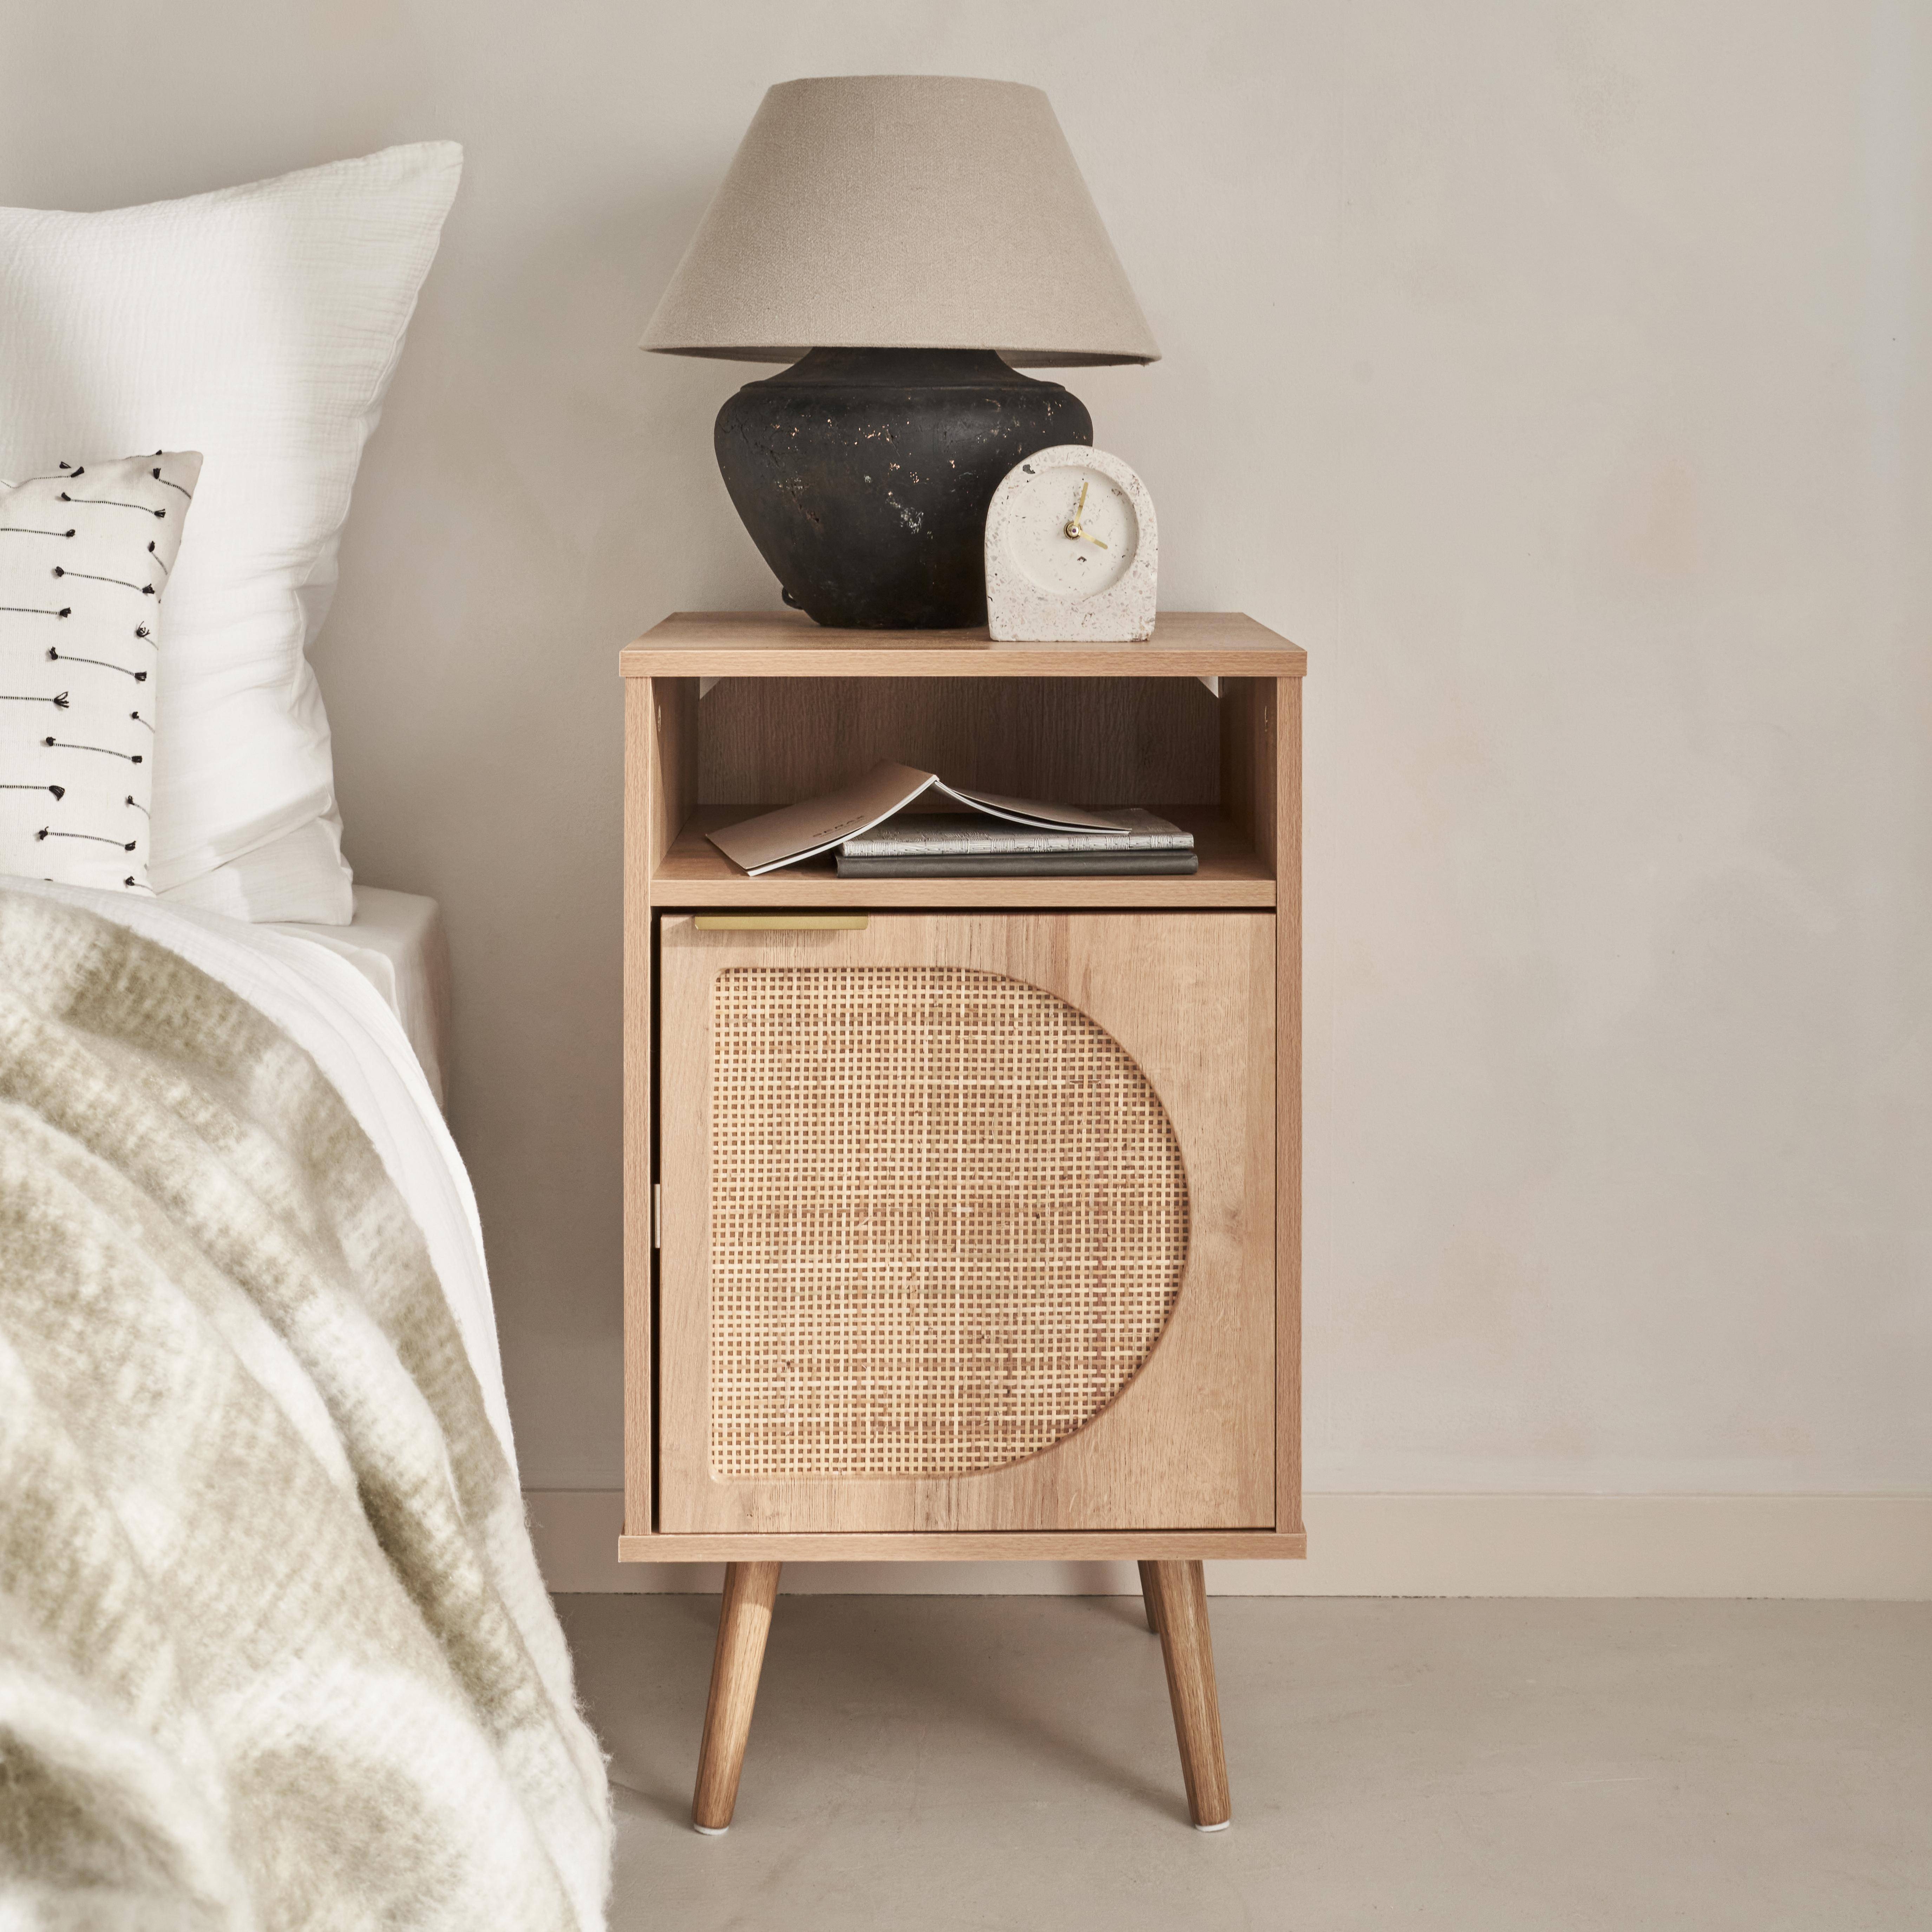 Wood and rounded cane rattan bedside table, 40x39x65.8cm, Eva, 1 cupboard, 1 storage space Photo1